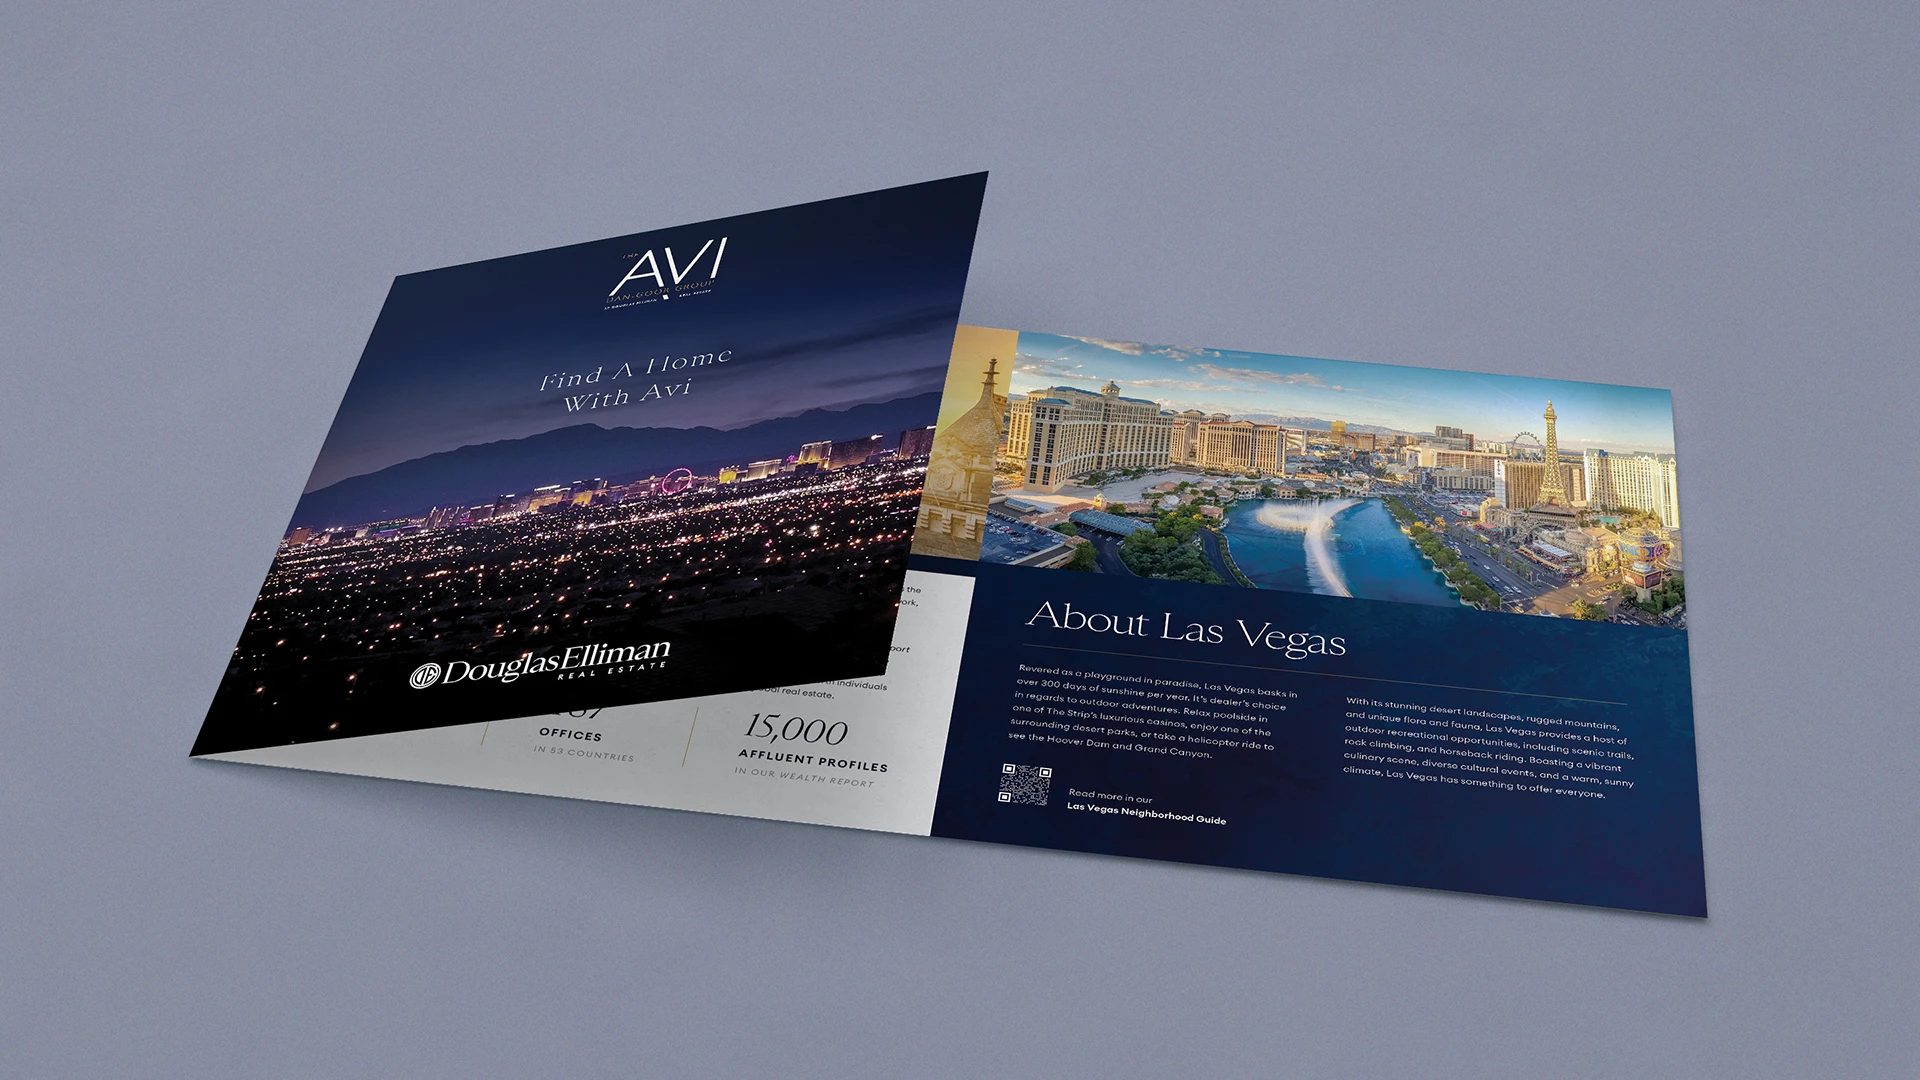 A square tri-fold brochure for a real estate agent. This is the first image showing the unfolding of the brochure.